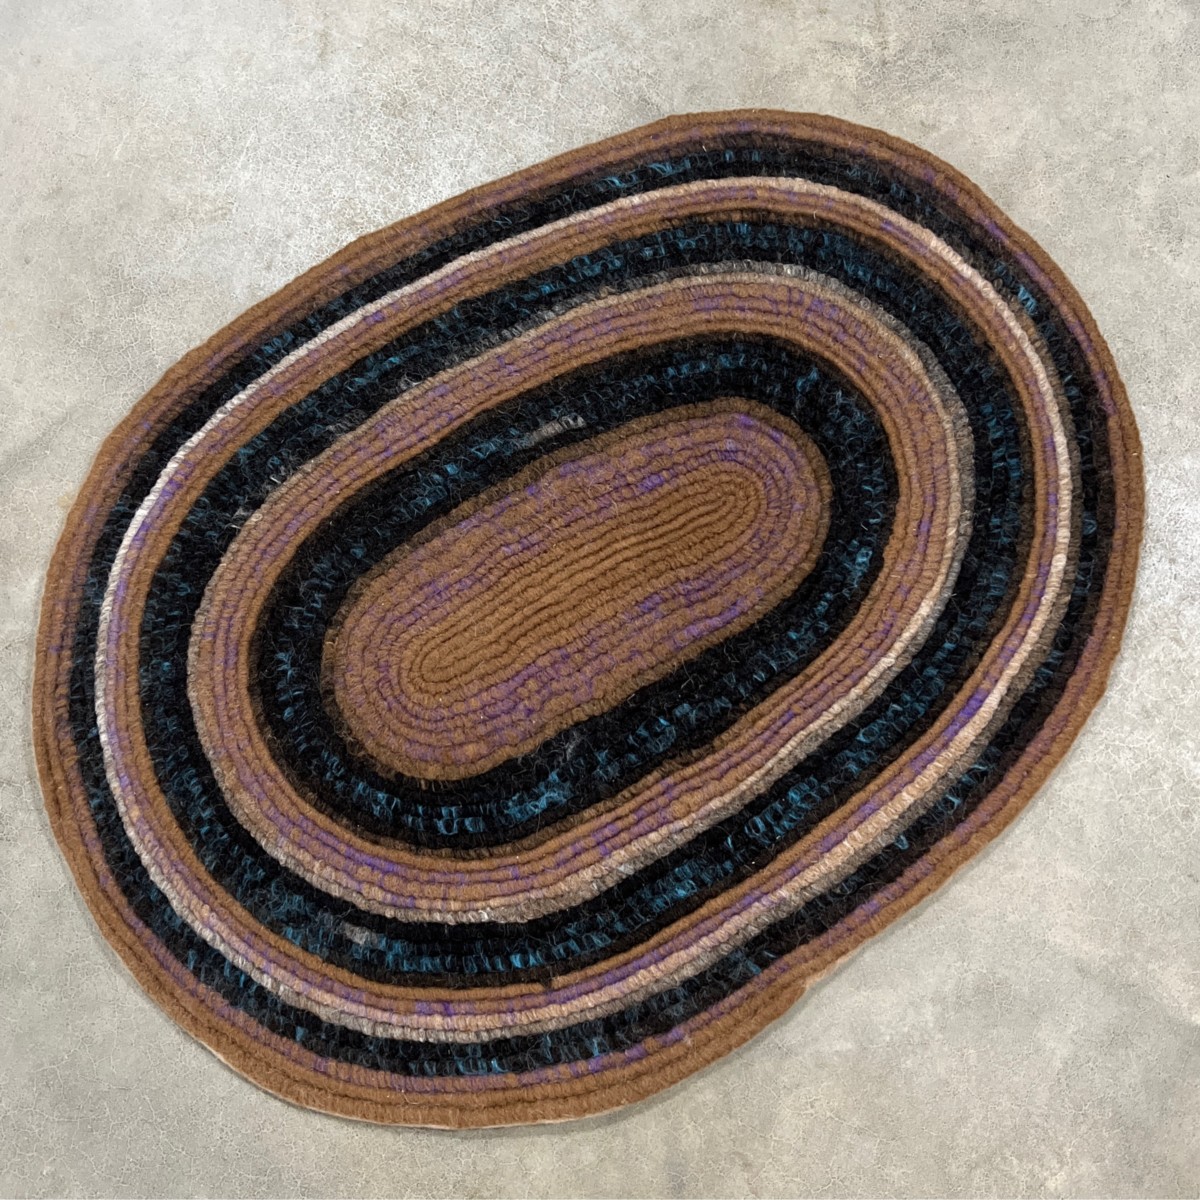 32 in. x 42 in. Blue and Stone Braided Oval Rug